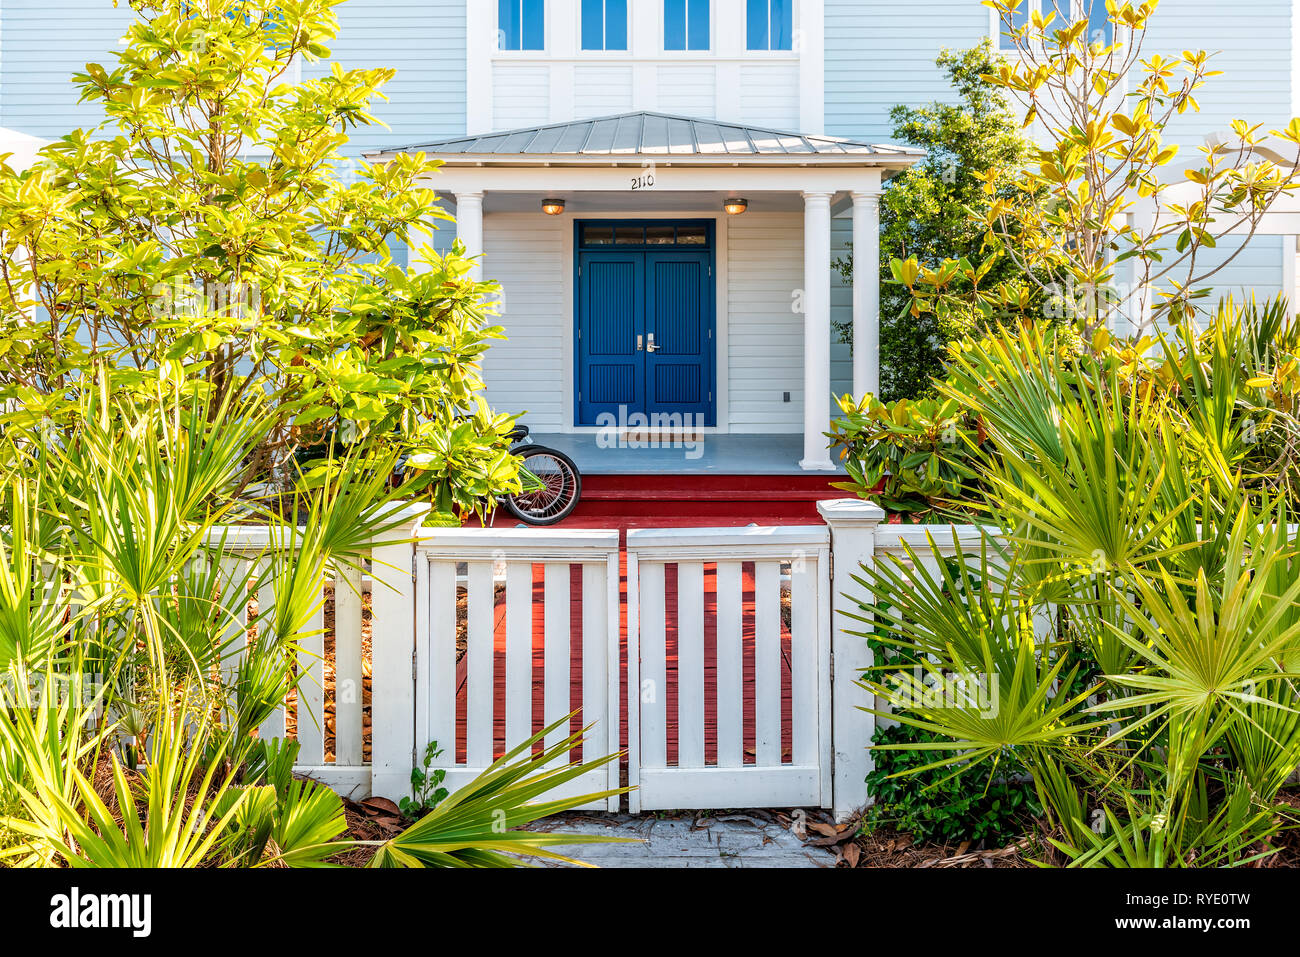 Seaside, USA - April 25, 2018: White and blue beach wooden wood architecture of house and door gate to front porch yard with green landscaping plants  Stock Photo